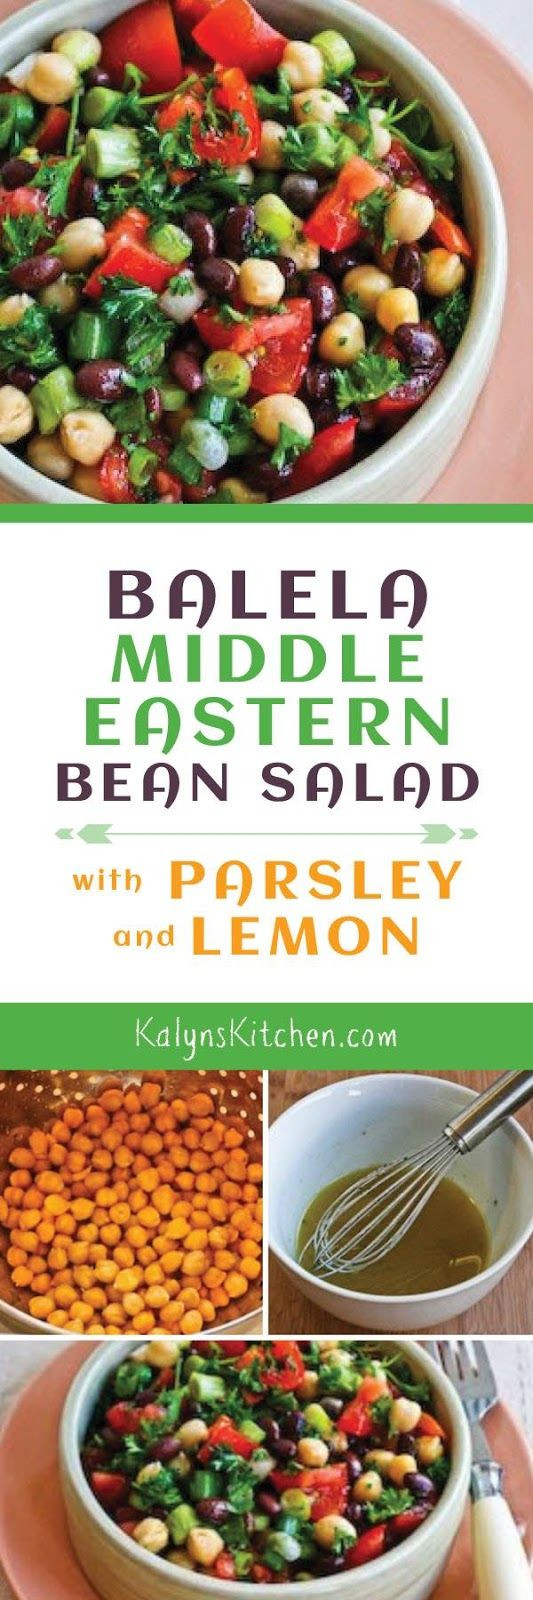 Middle Eastern Side Dishes
 Balela Middle Eastern Bean Salad is delicious as a